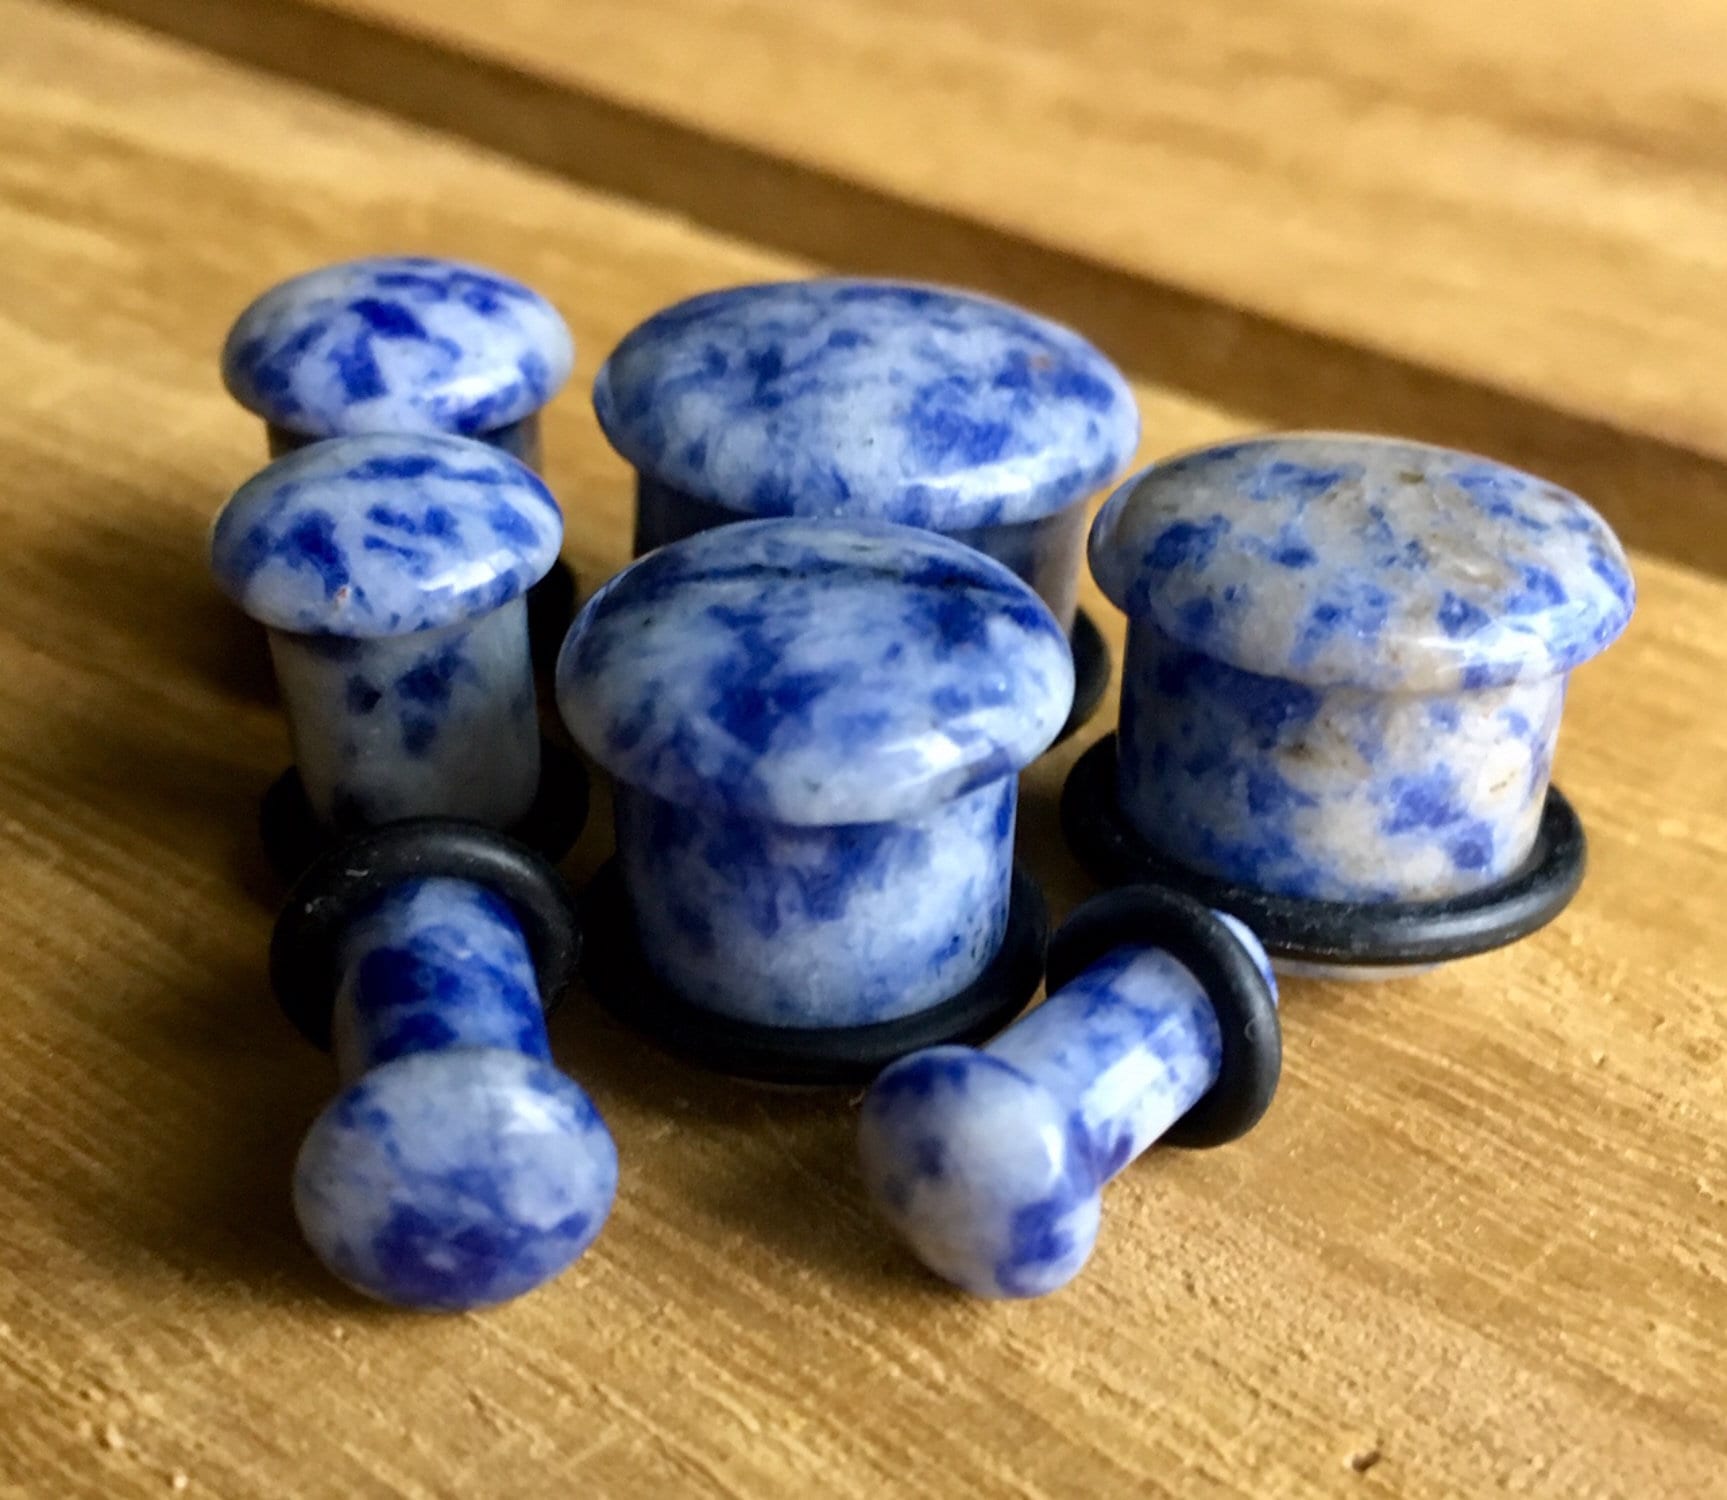 PAIR of Organic Blue Spot Jasper Single Flare Stone Plugs with O-Rings - Gauges 4g (5mm) up to 5/8" (16mm) Available!